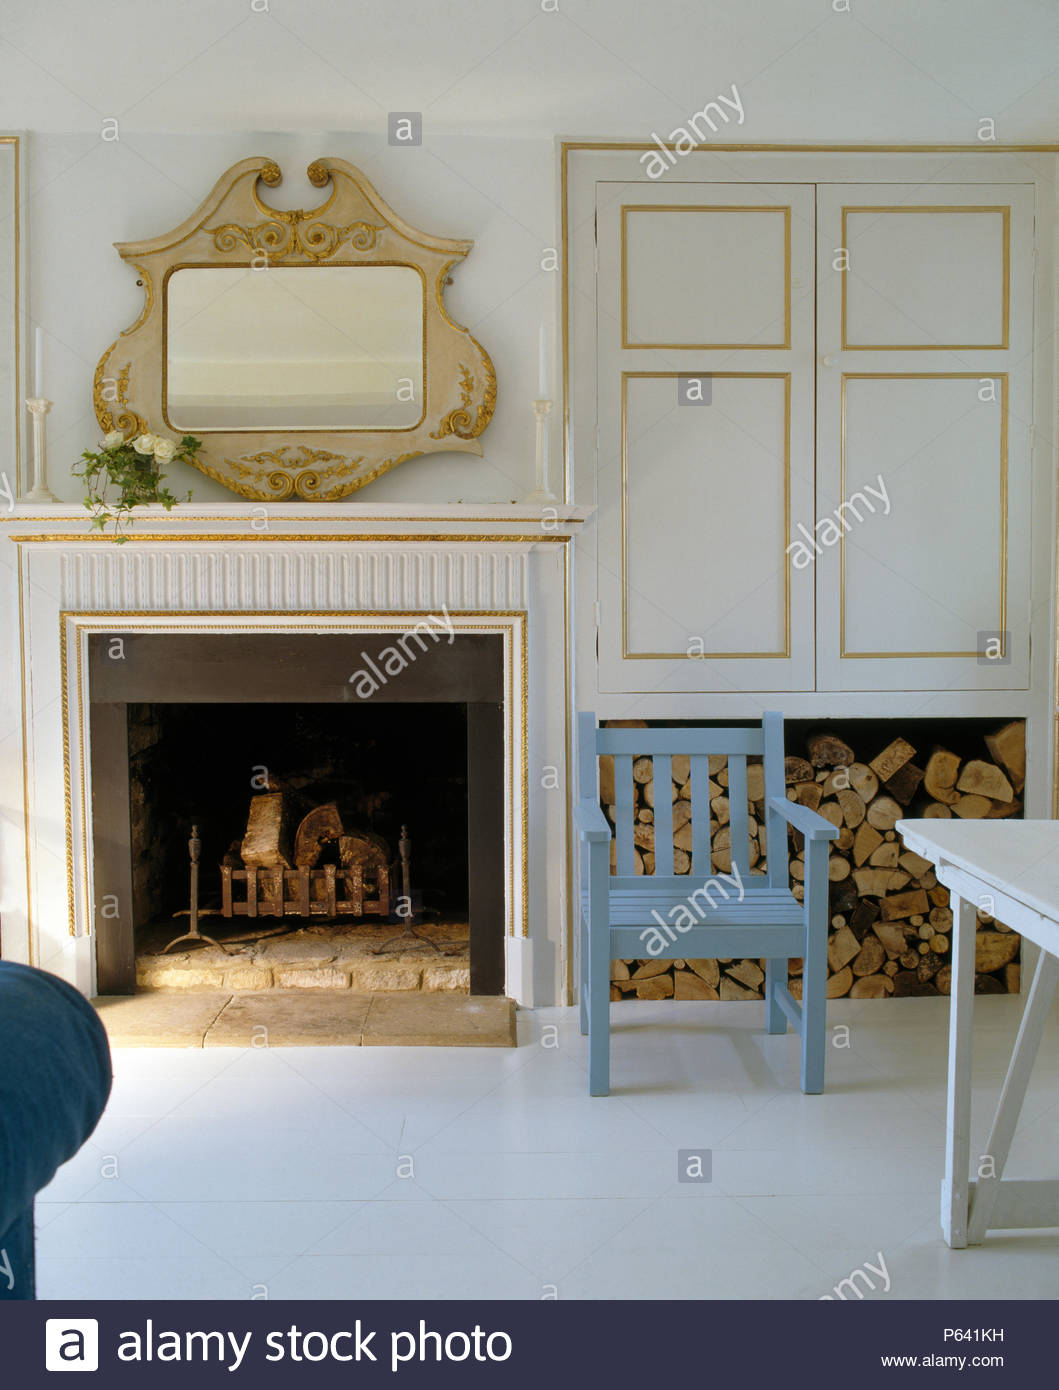 Fireplace Mirror Lovely ornate Wooden Mirror Above Fireplace In Contemporary Living